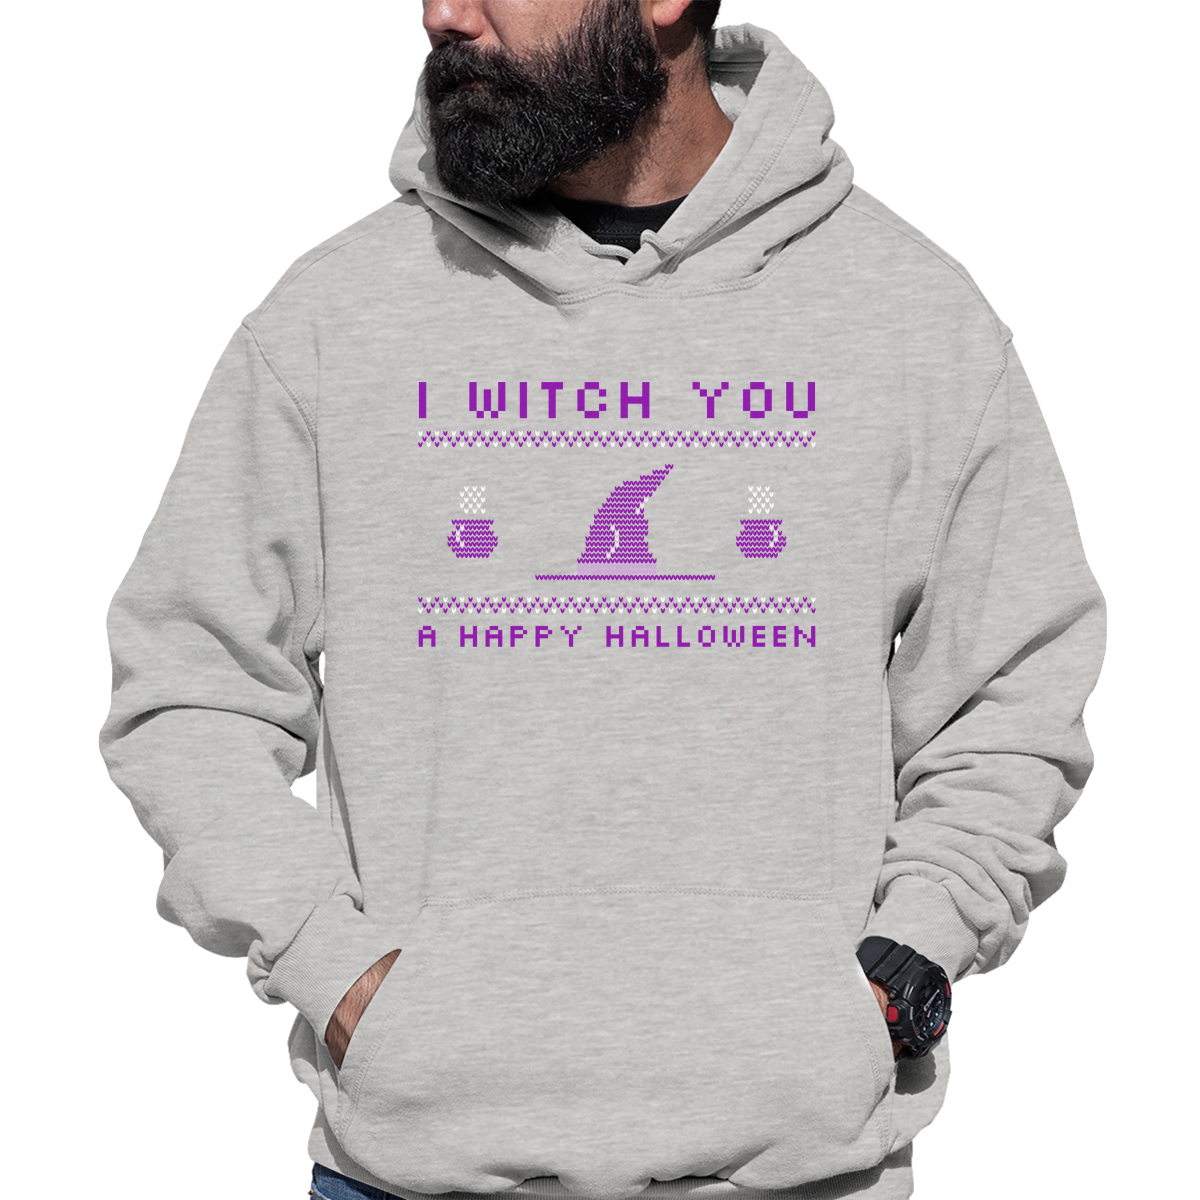 I Witch You a Happy Halloween Unisex Hoodie | Gray